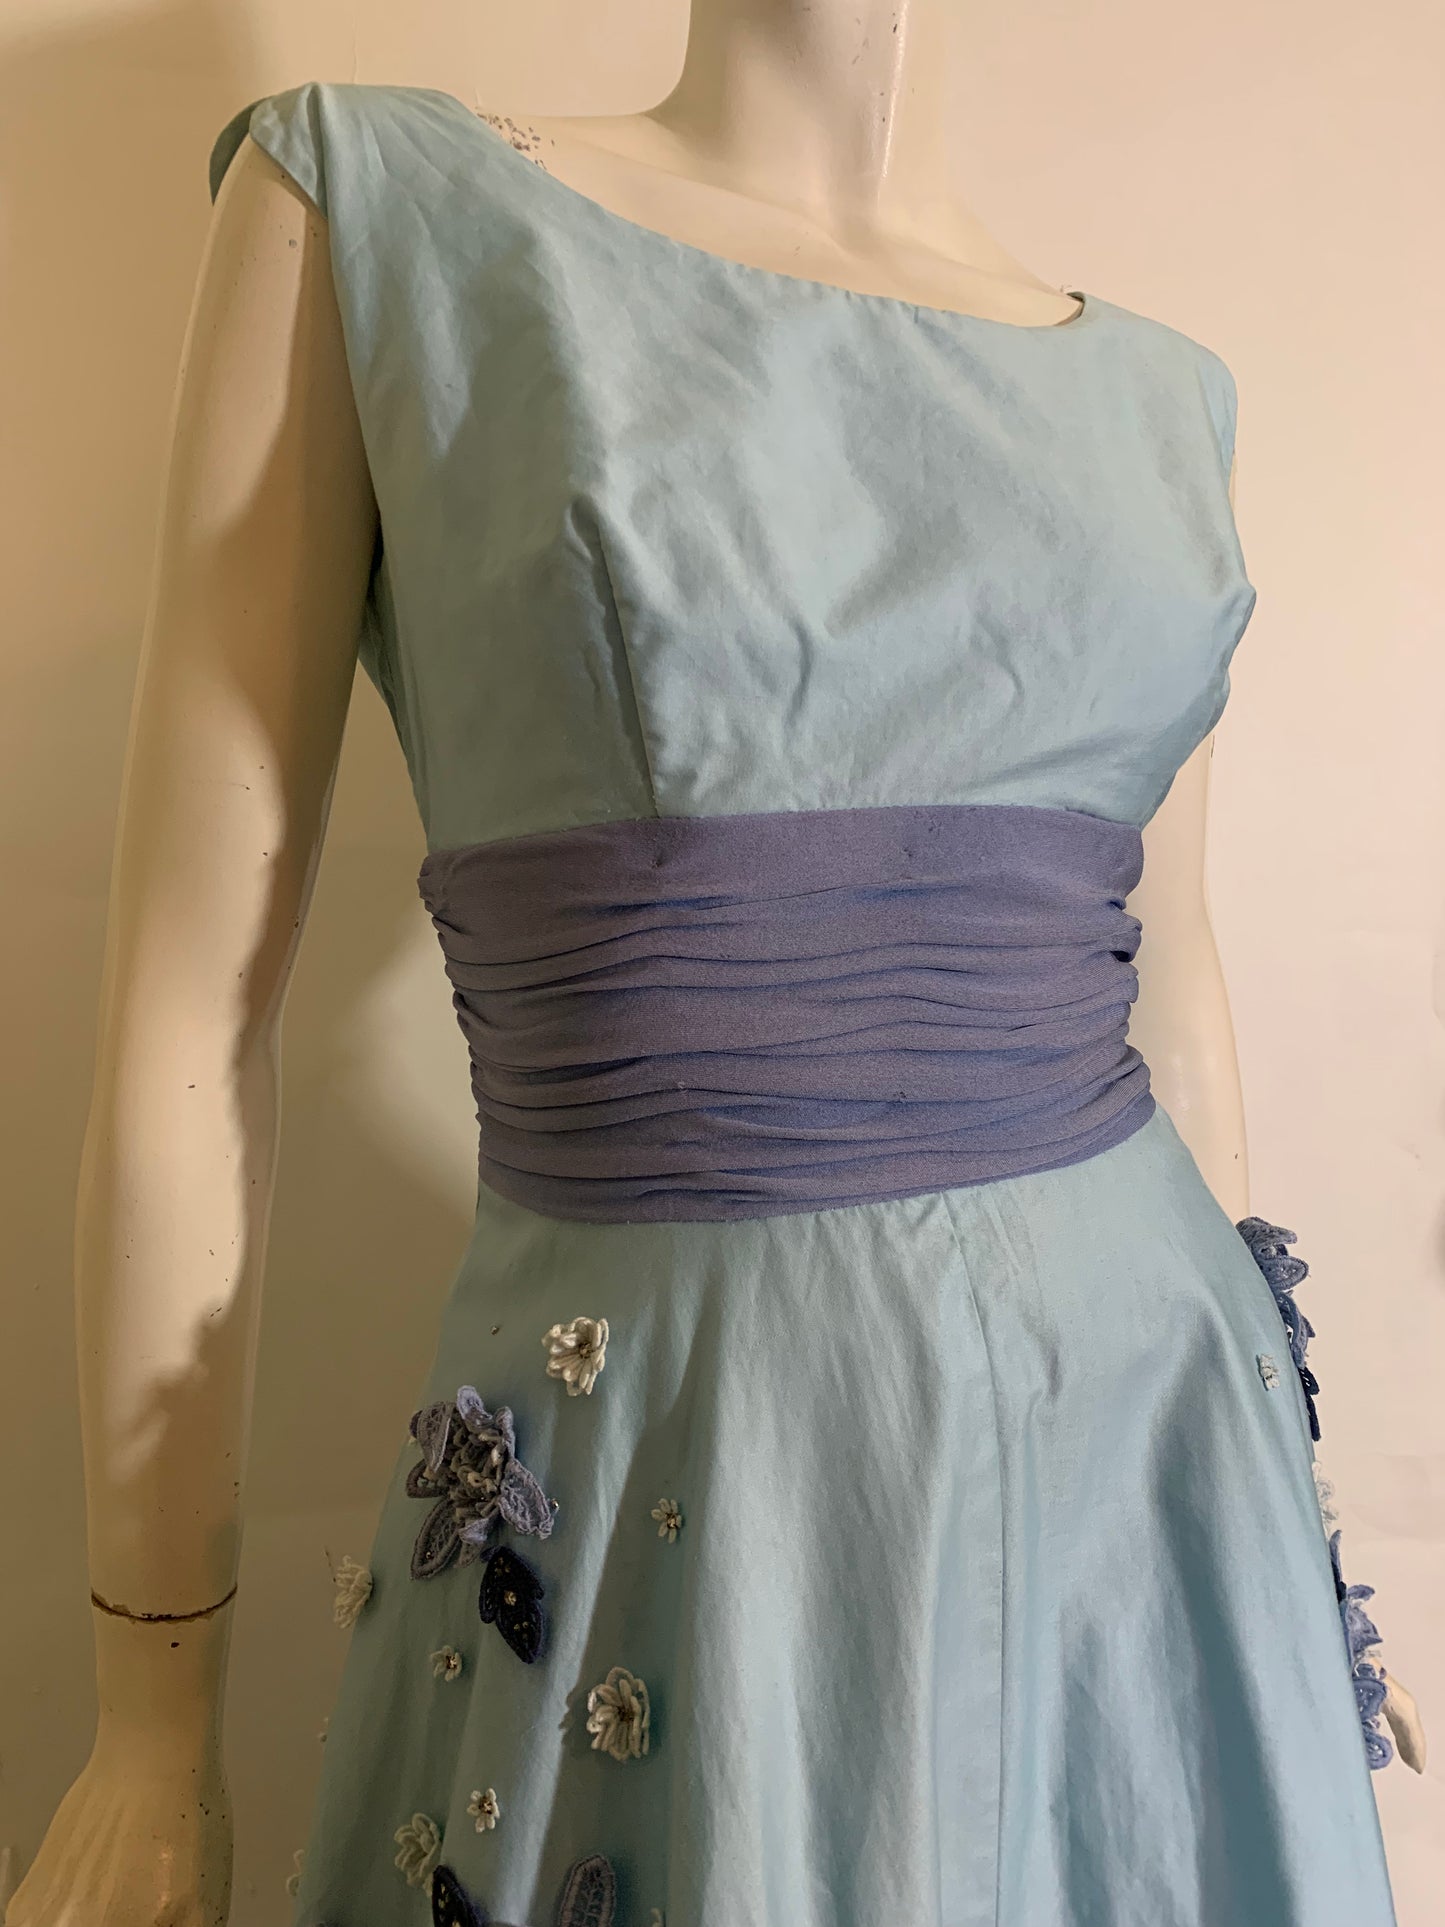 RESERVED Baby Blue Cotton Sleeveless Dress Lace and Rhinestone Accents circa 1960s